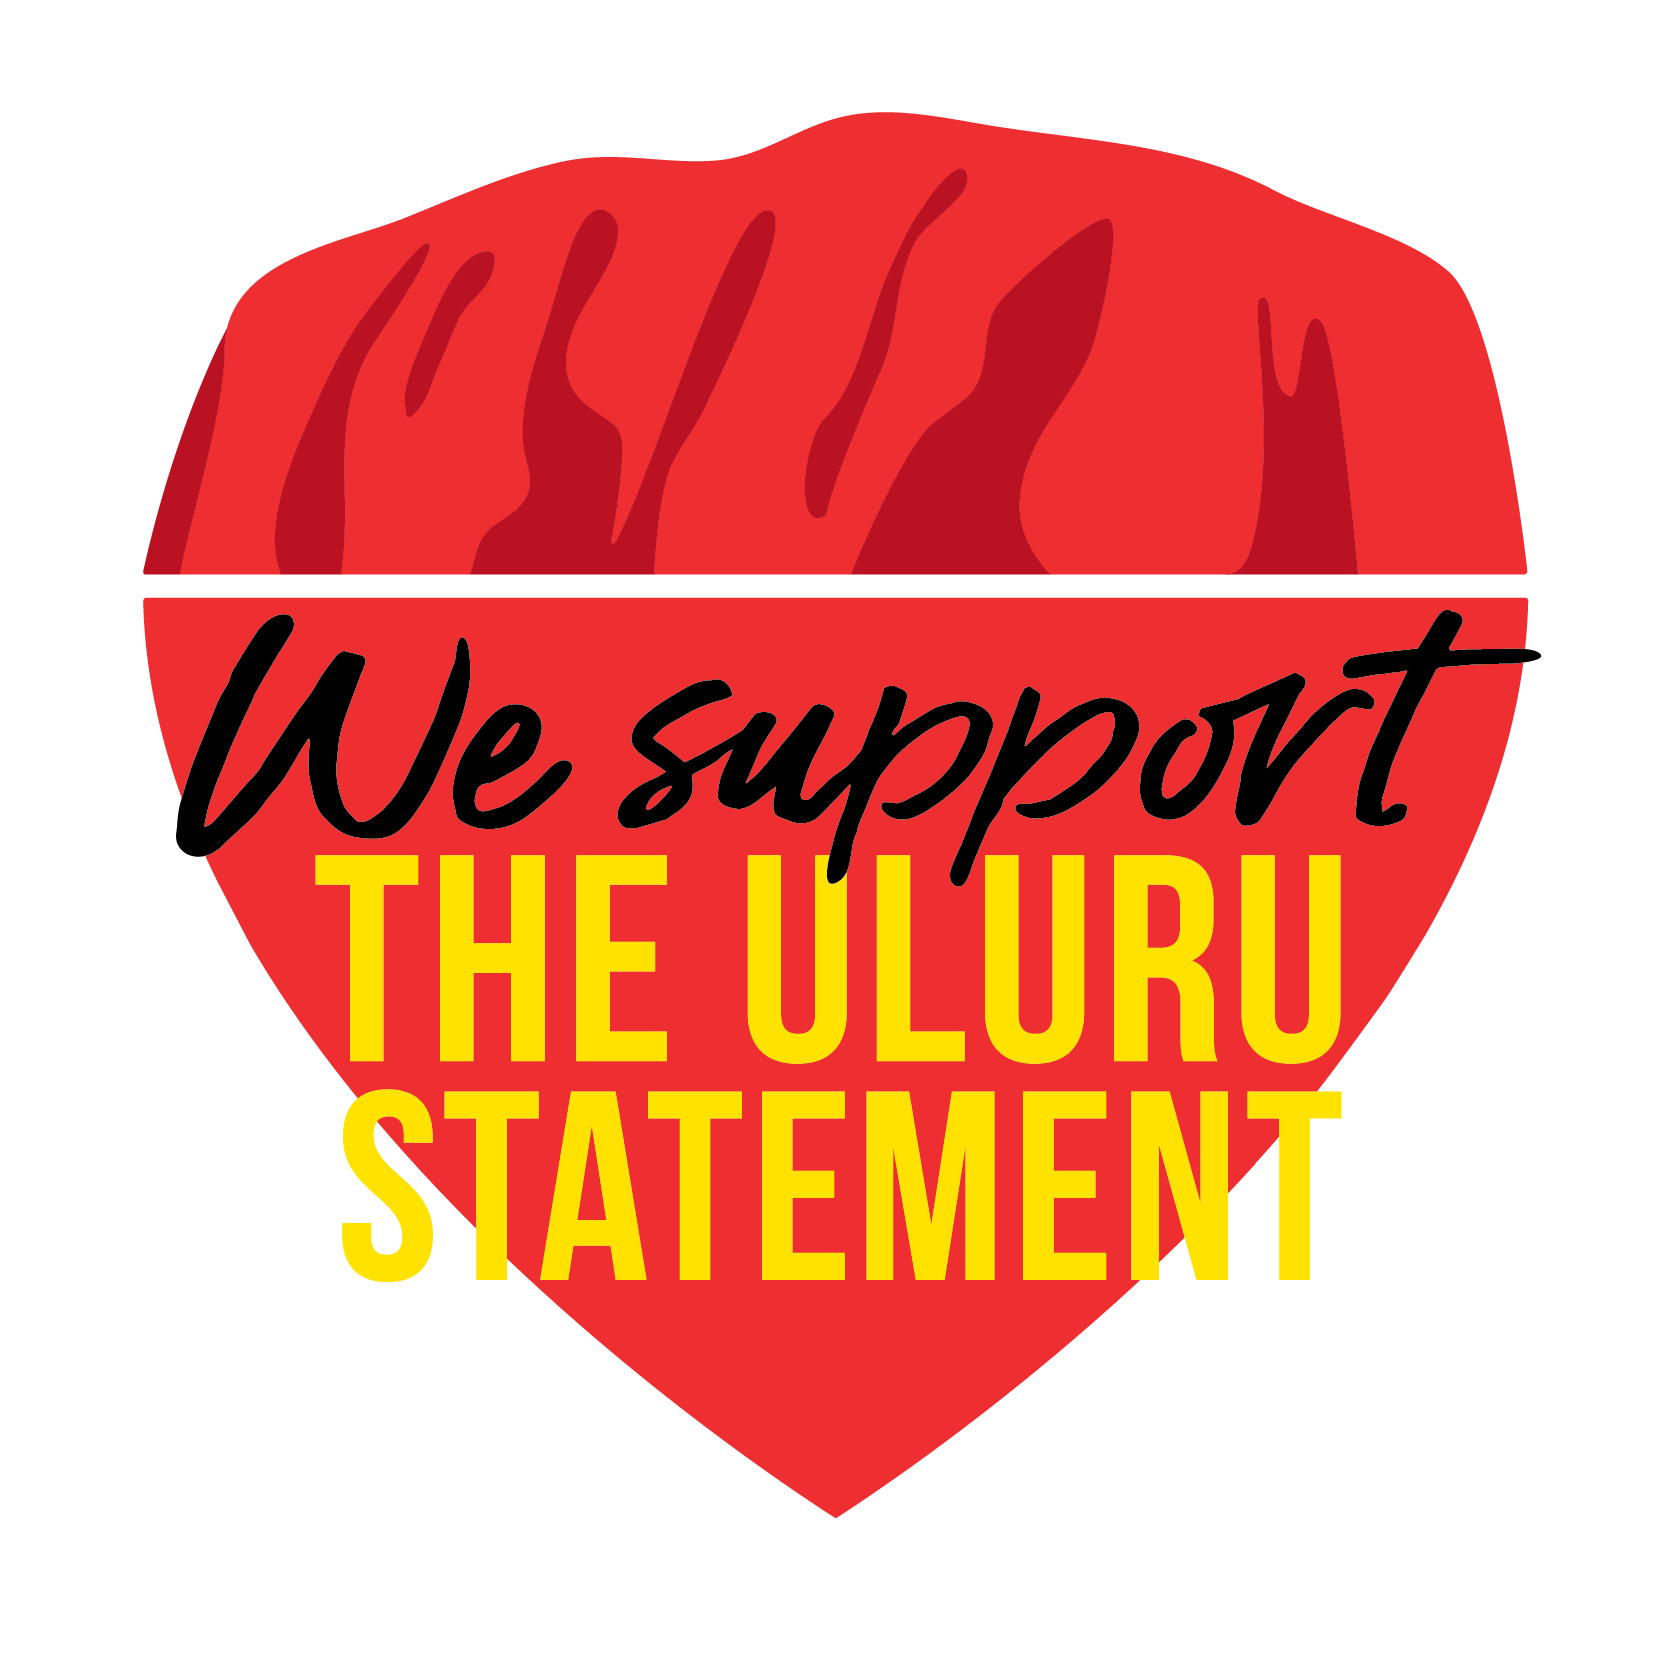 Illustration of Uluru merged with a heart. Text reads, "We support the Uluru Statement".